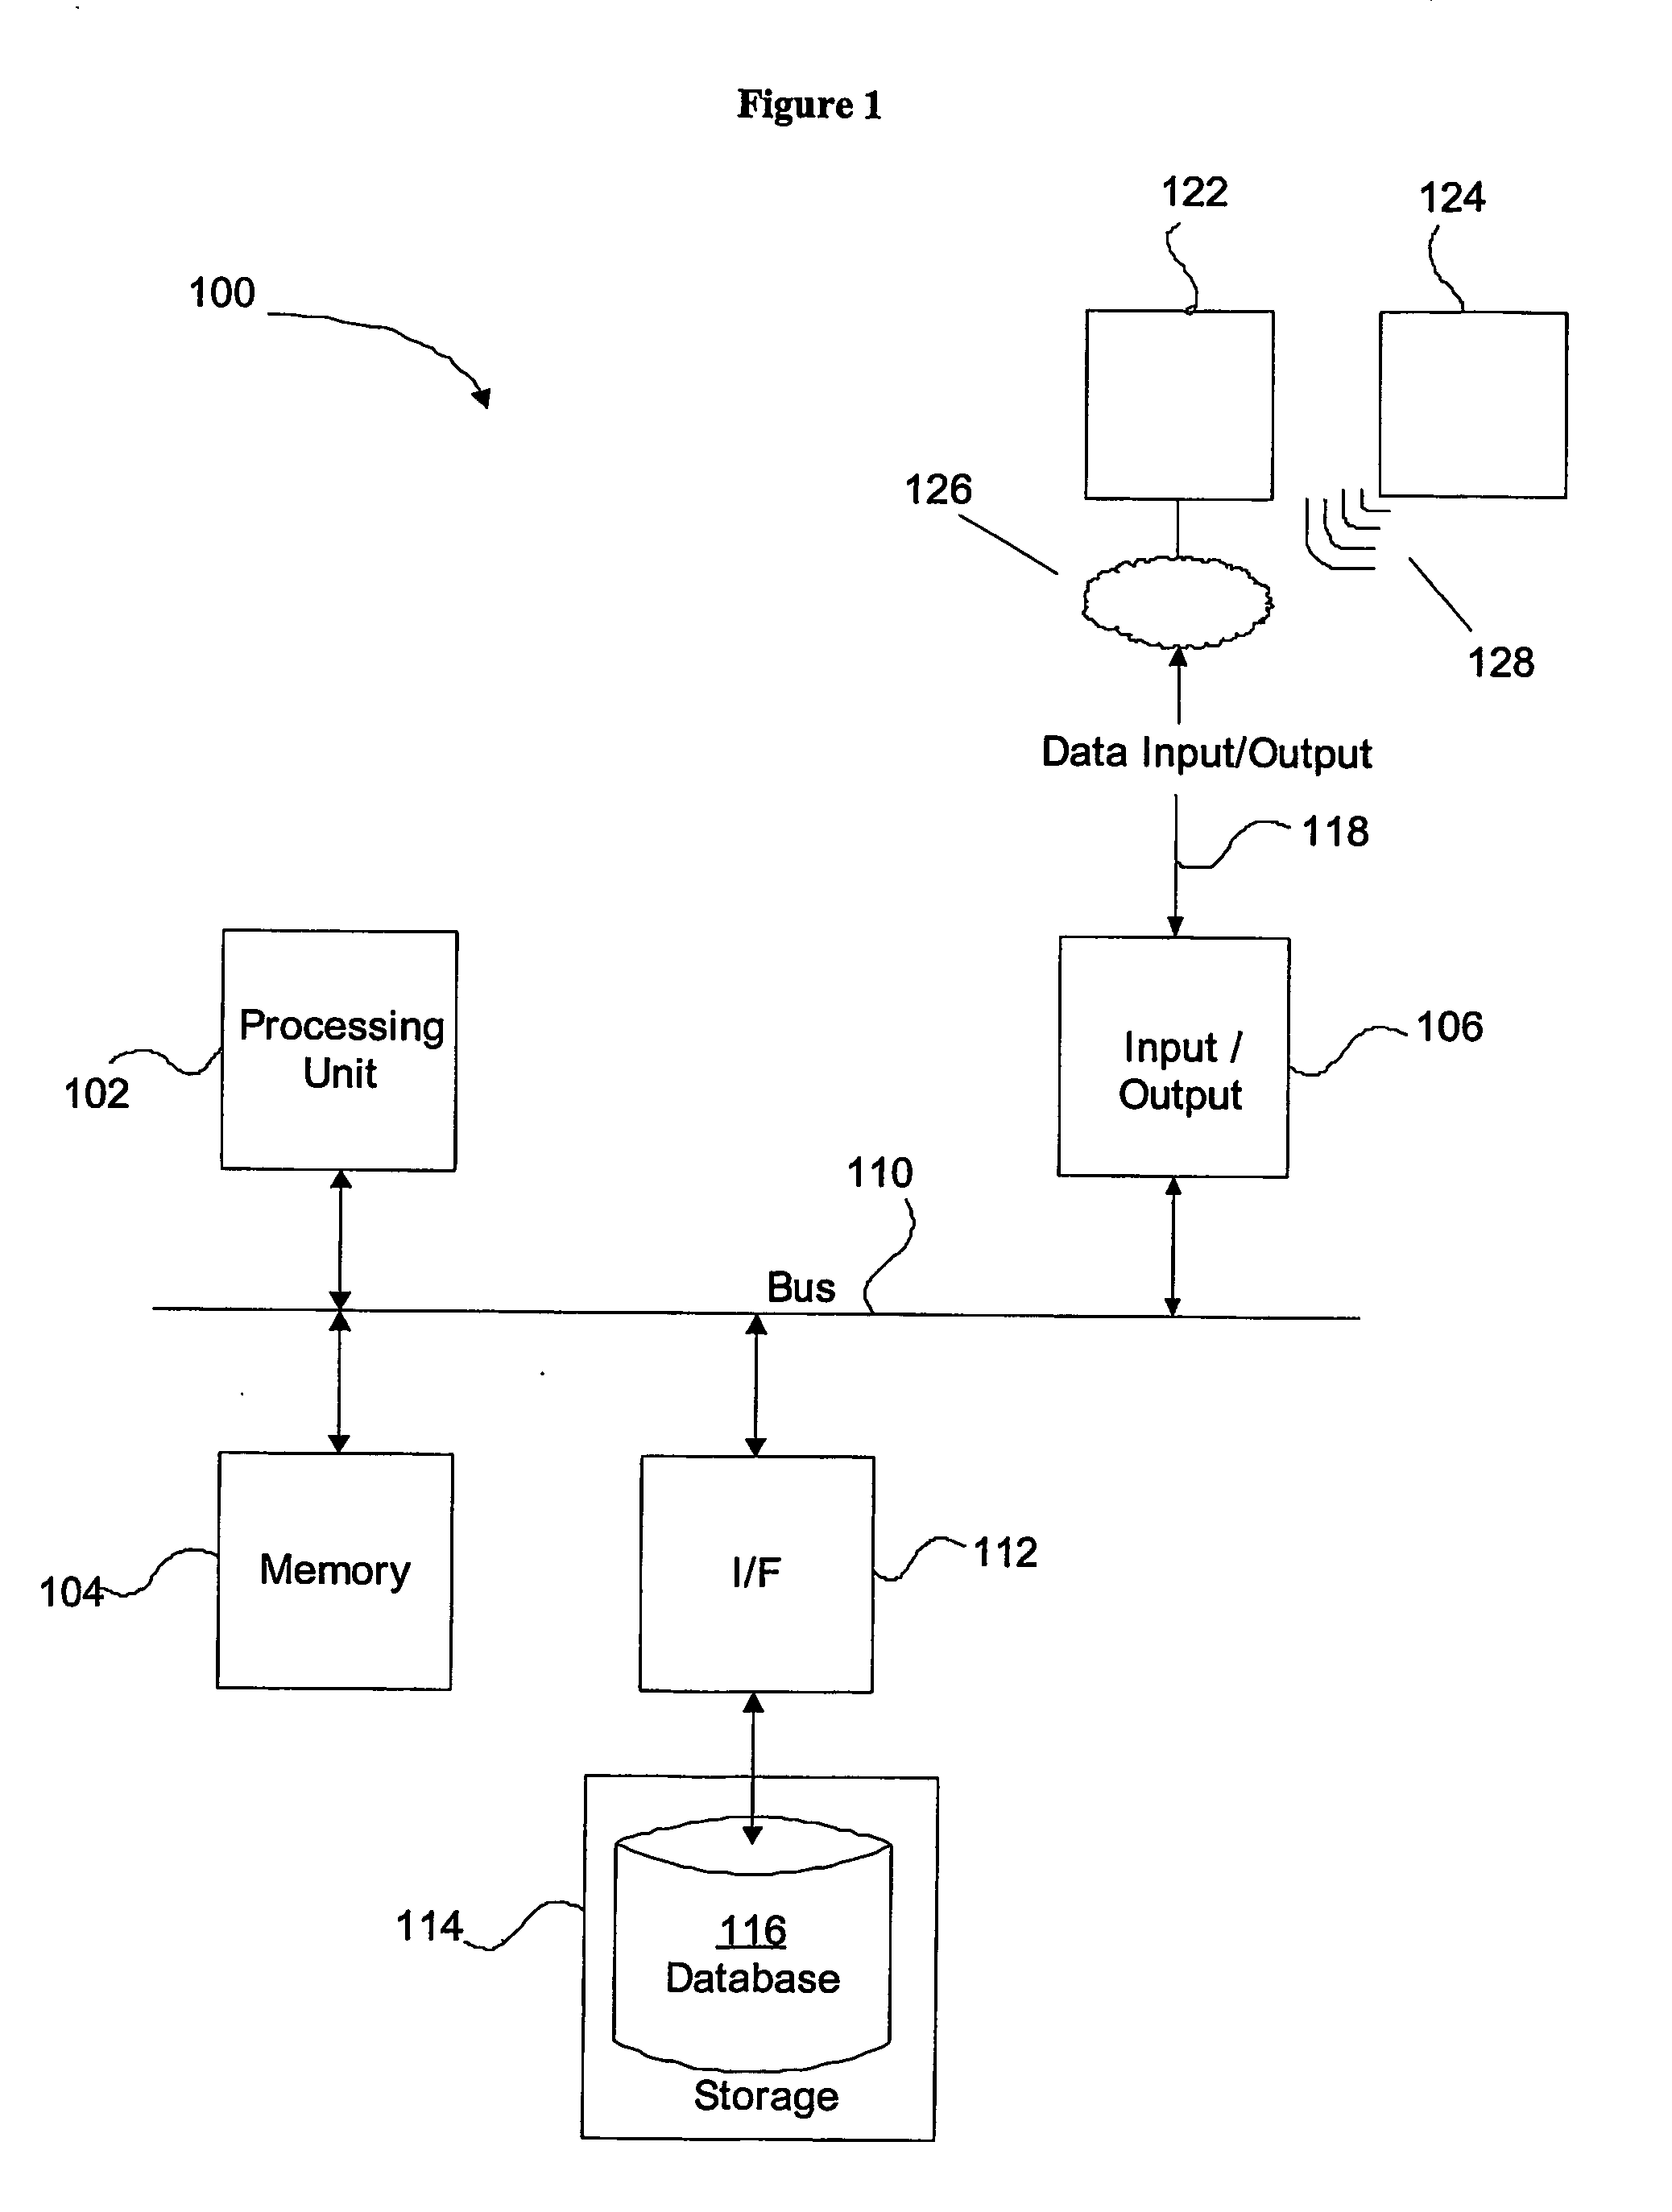 Method and system to download and track digital material